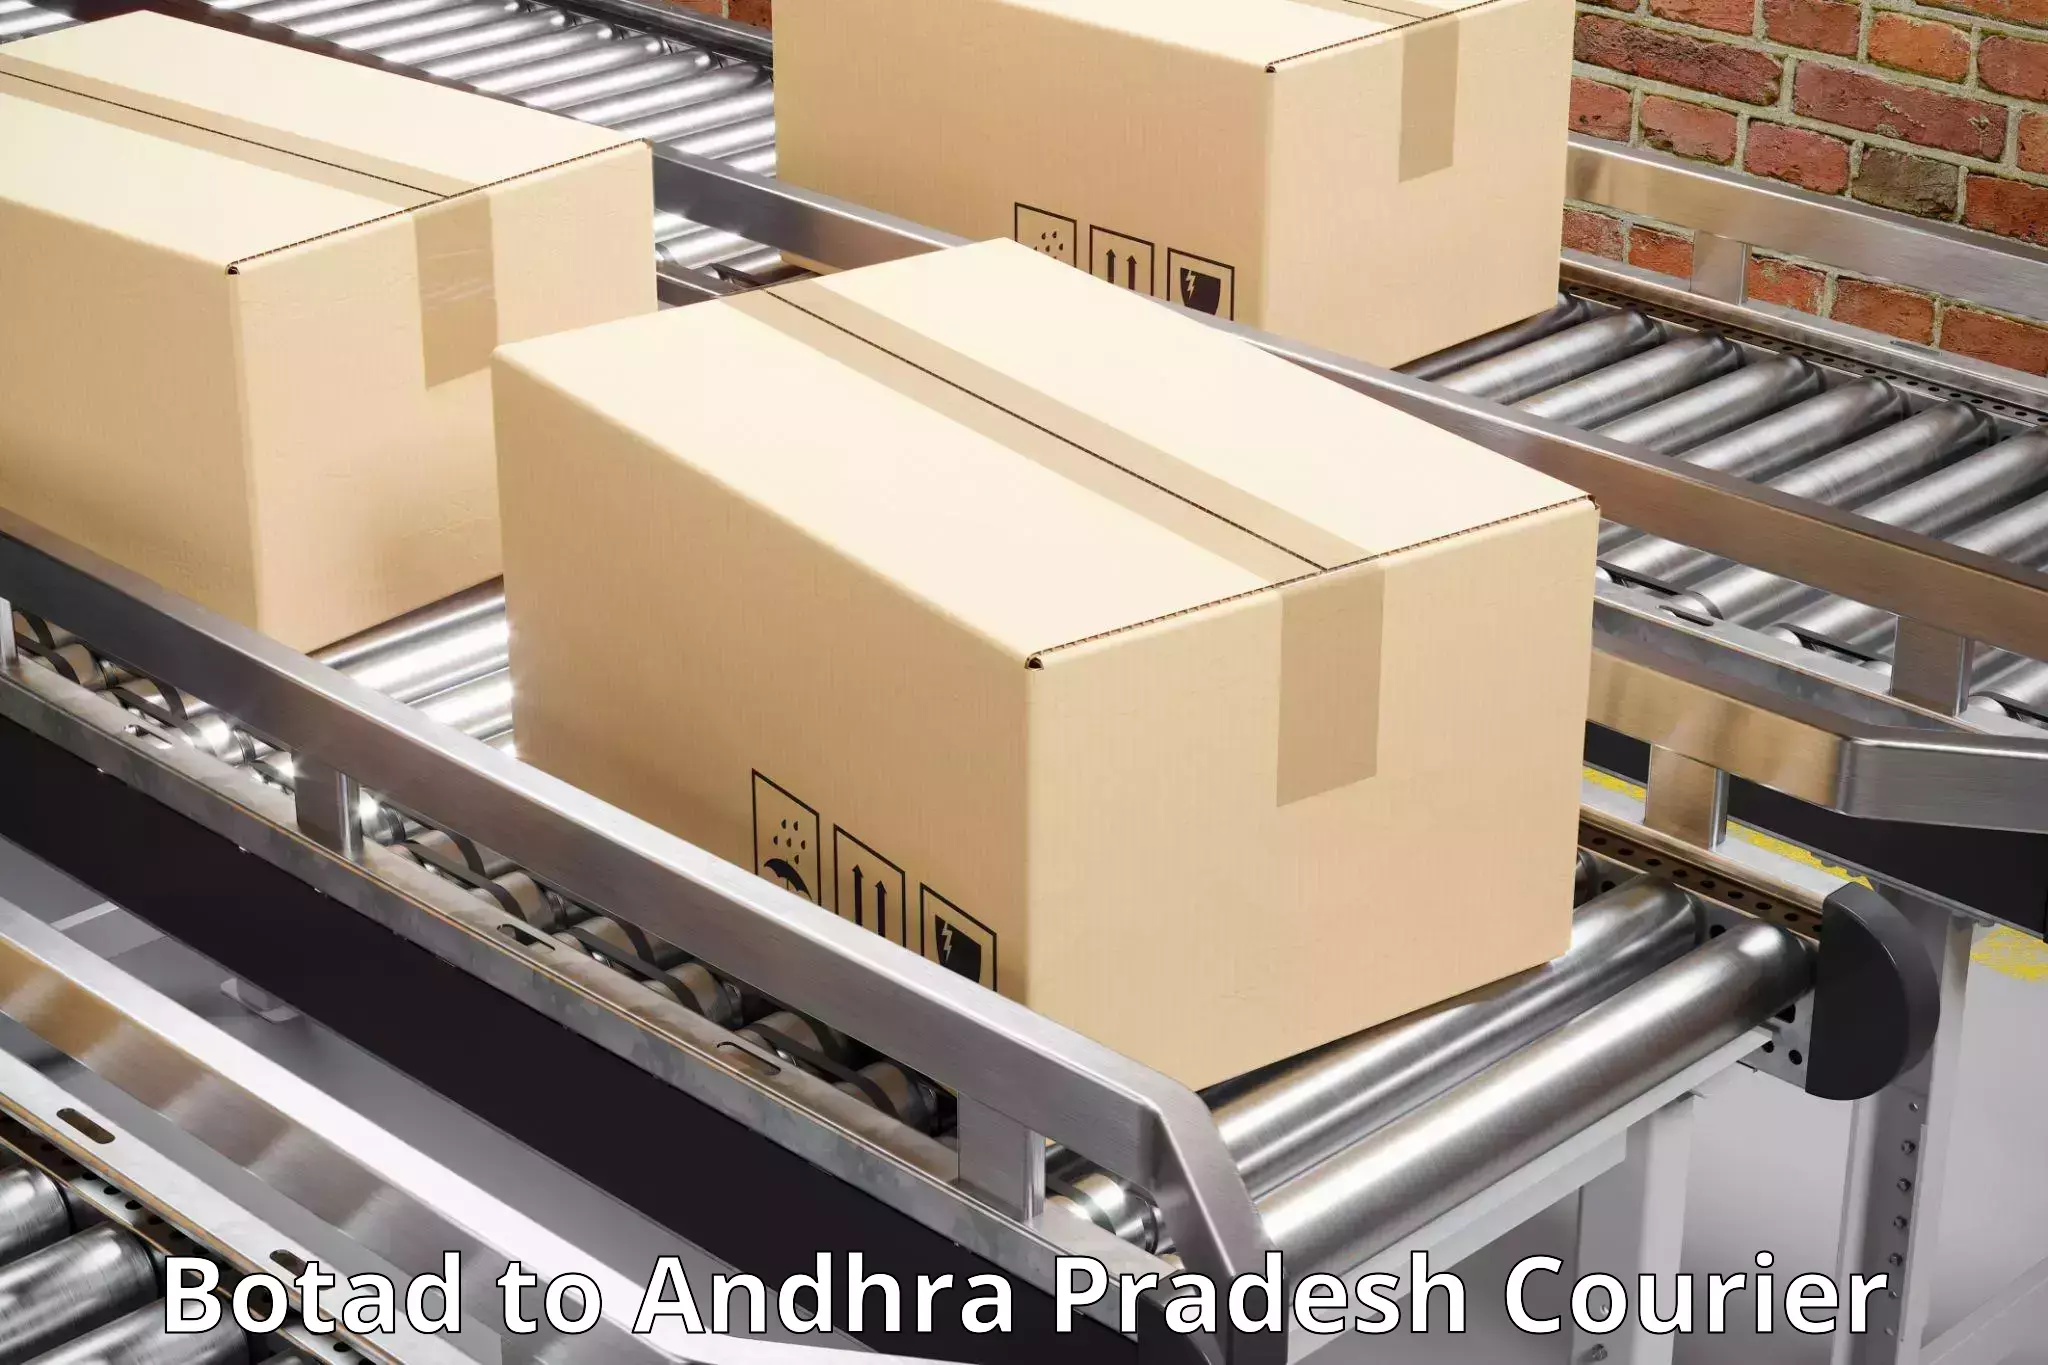 Personal parcel delivery in Botad to Tirupati